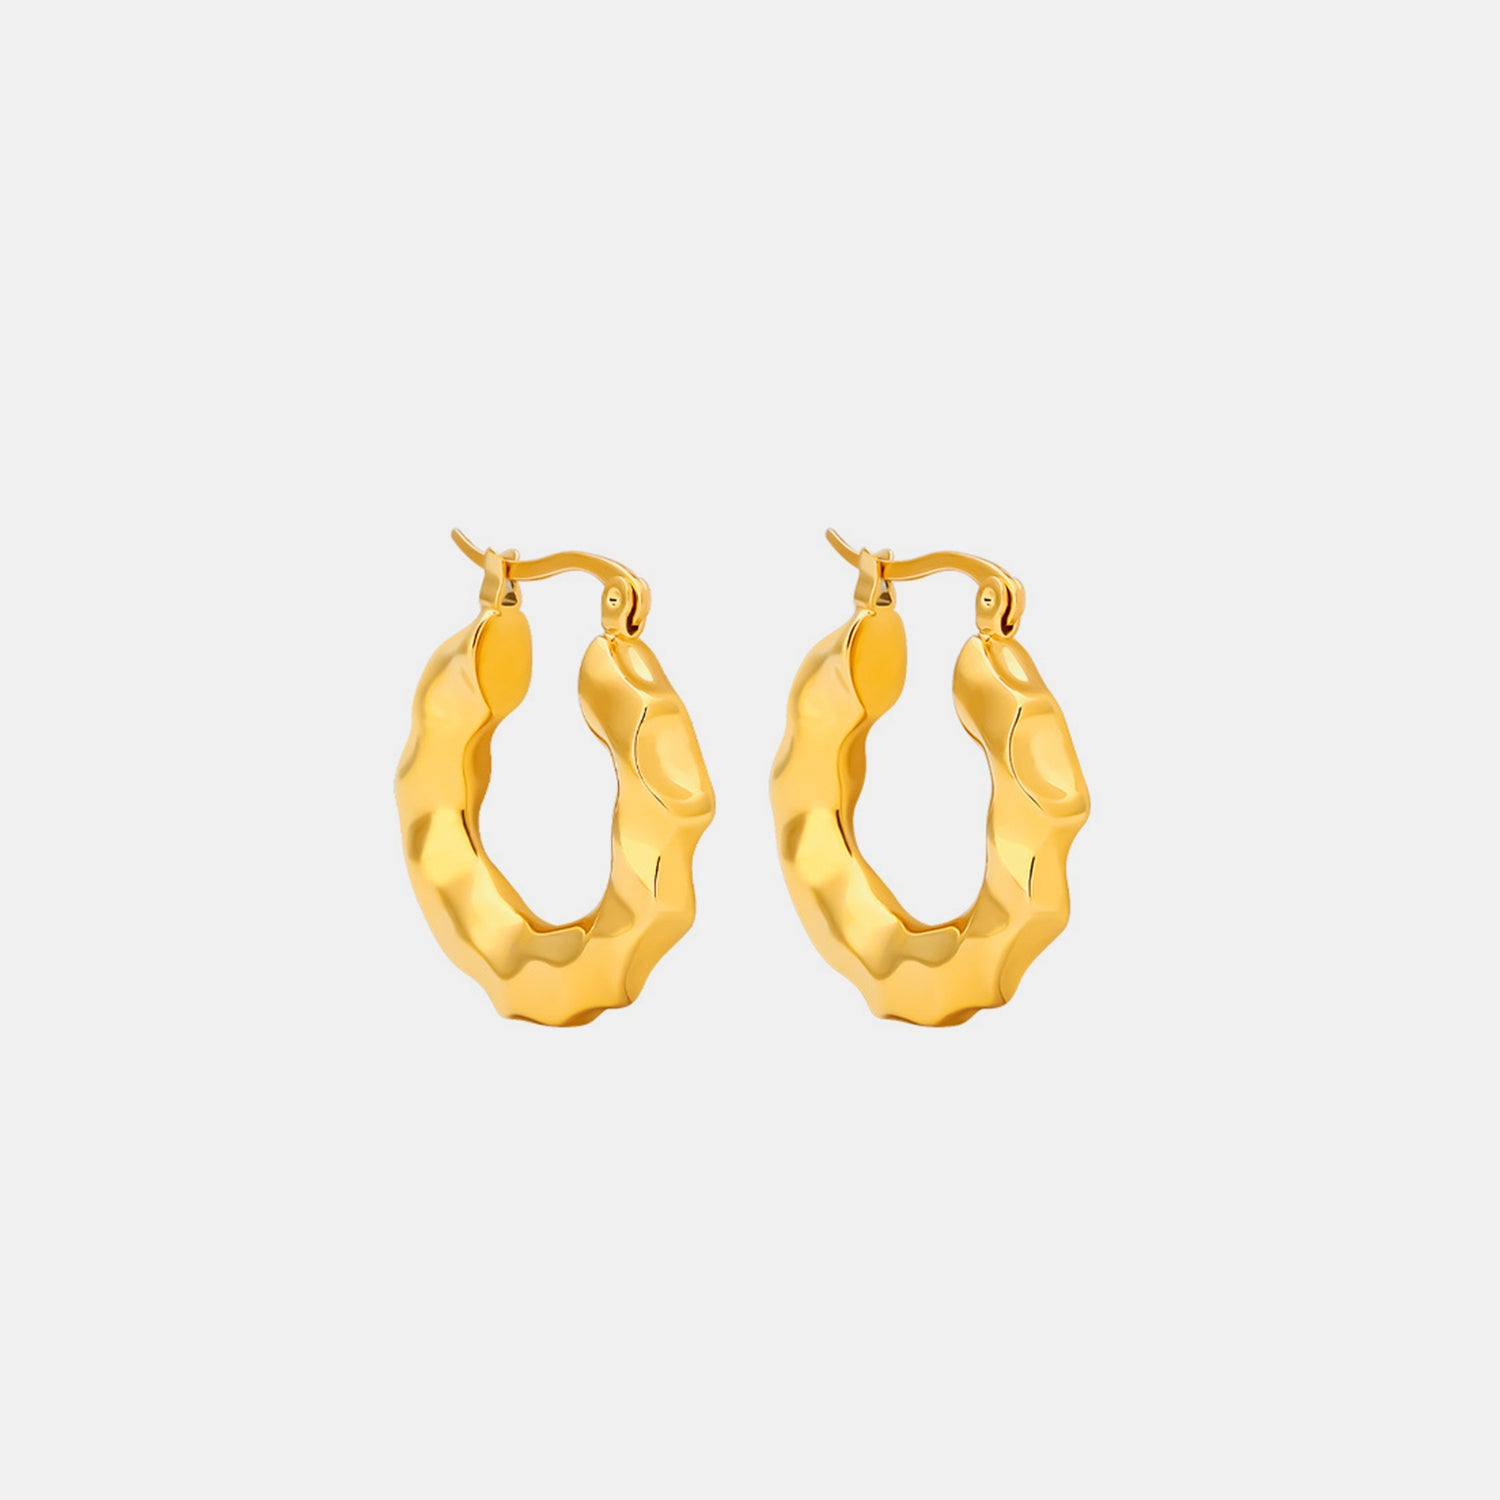 Fashionable Gold-Plated Huggie Earrings